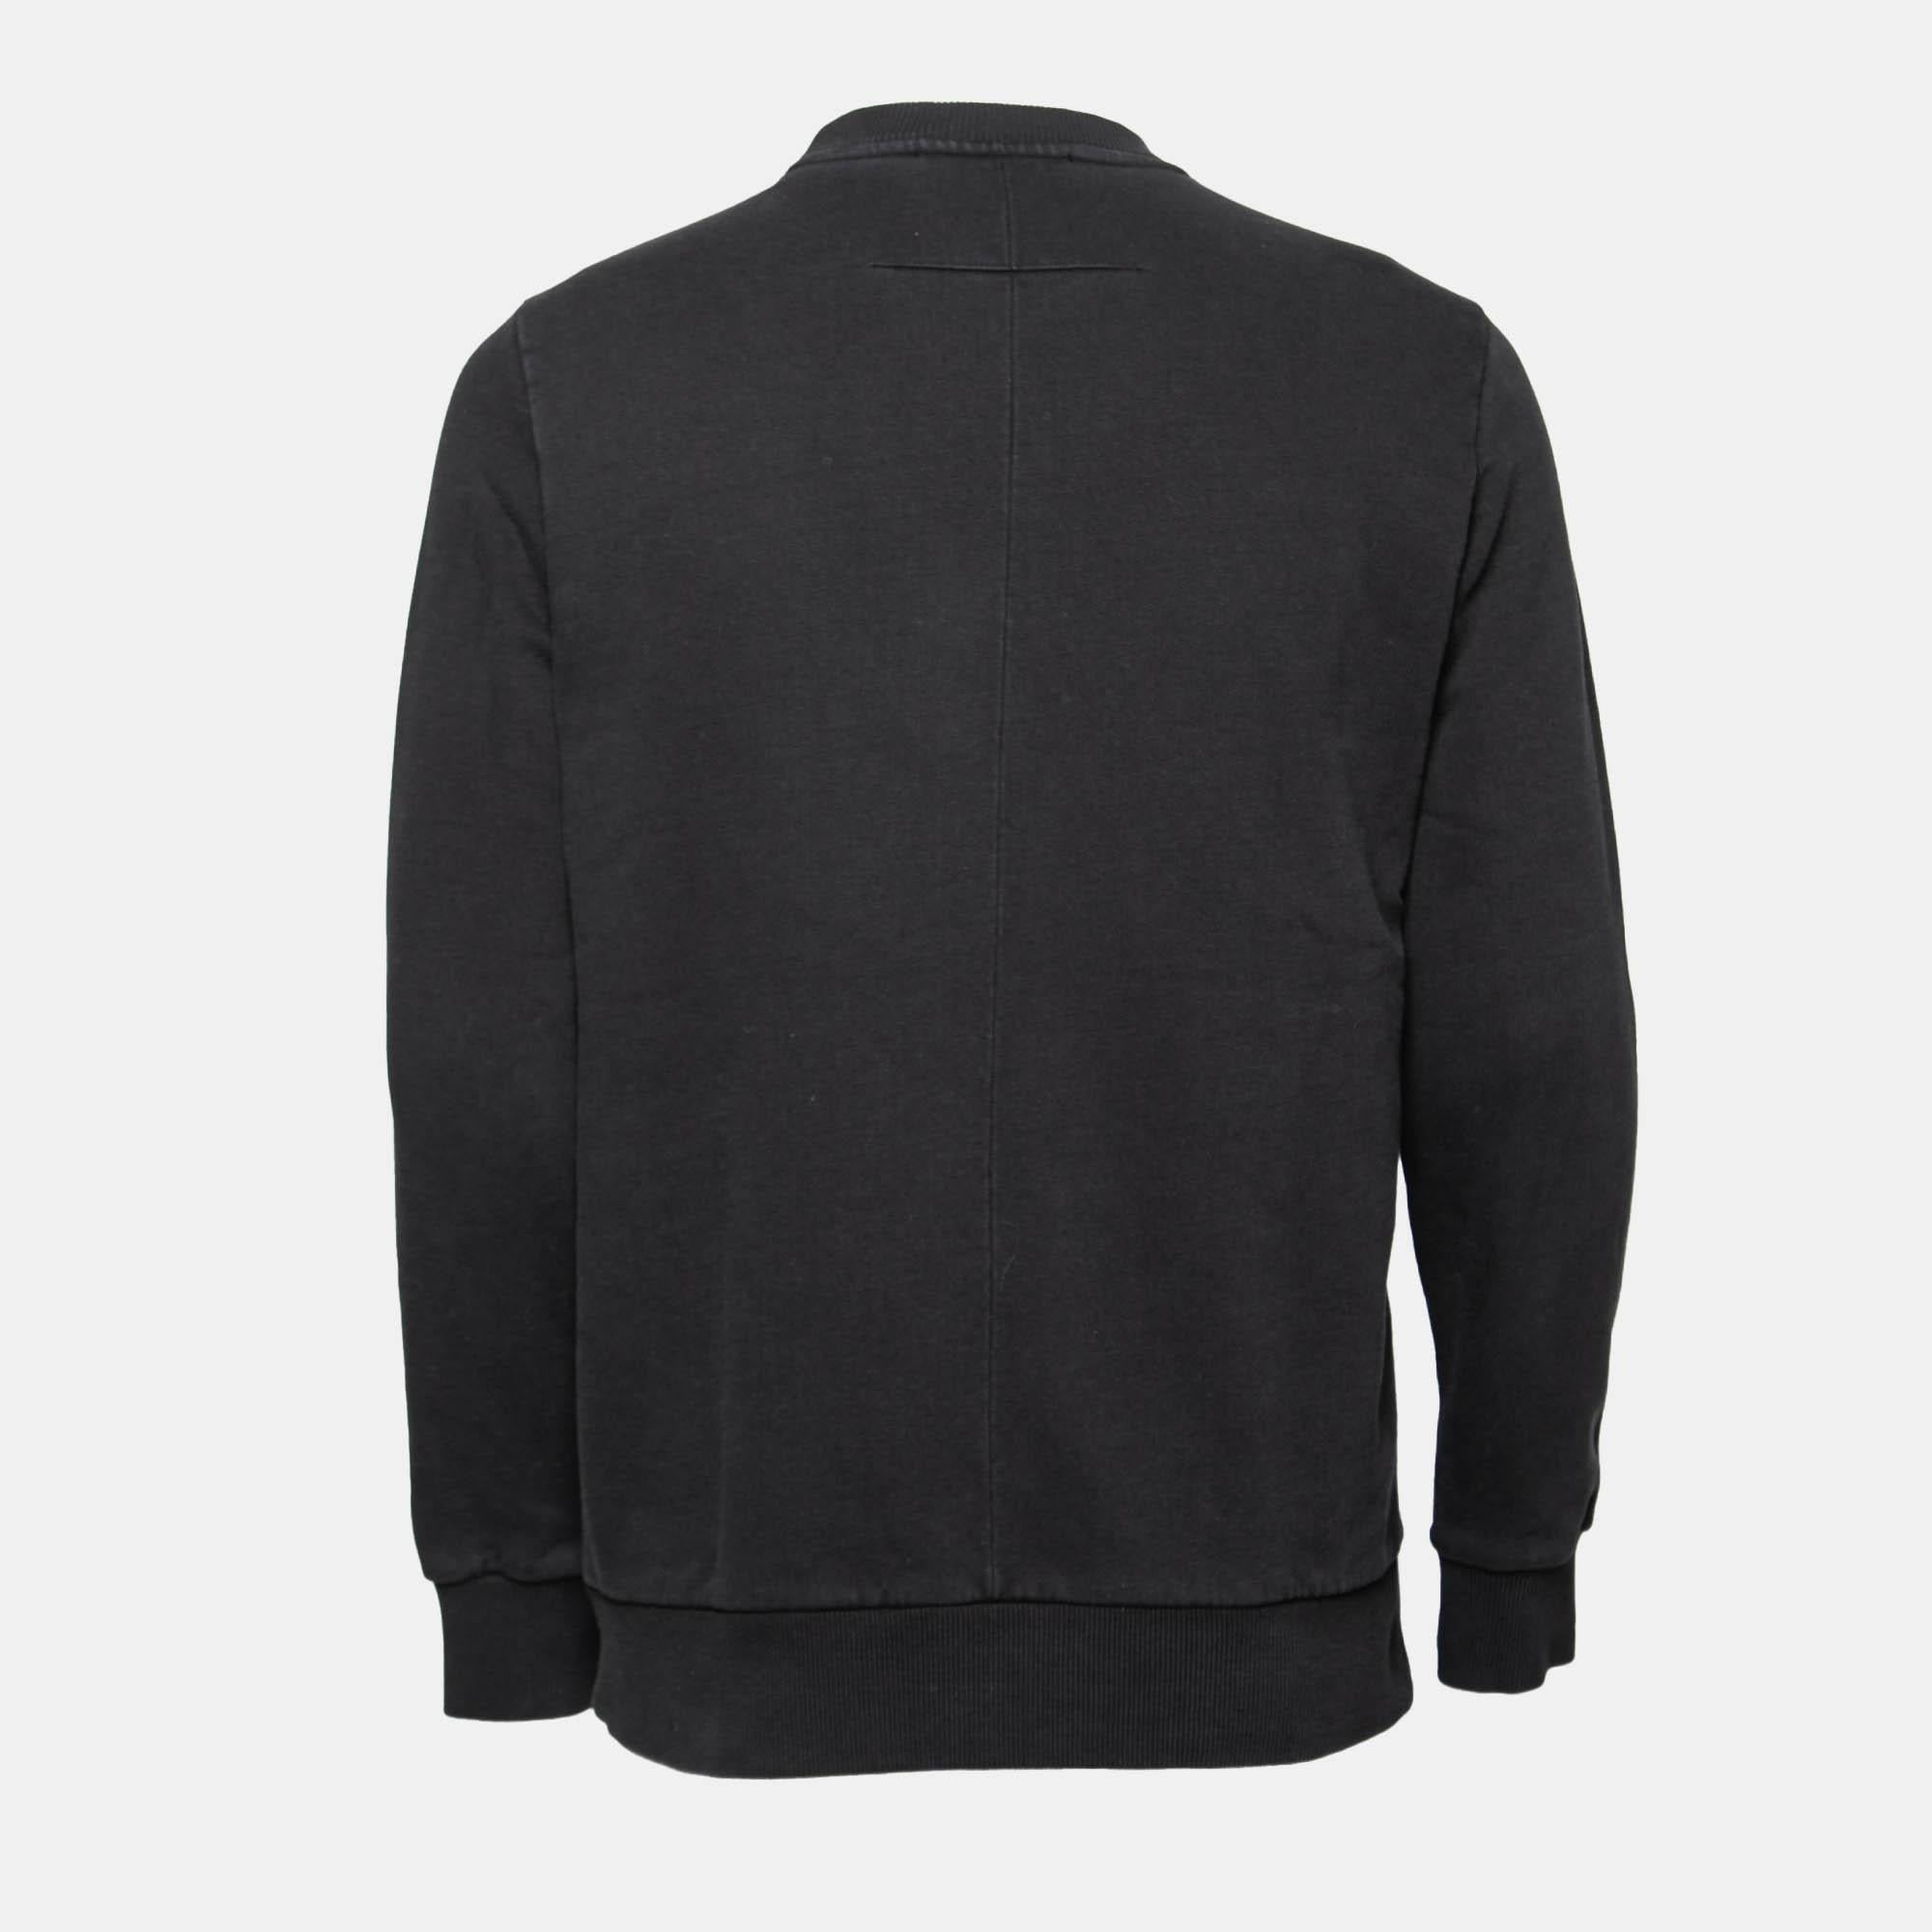 Givenchy's sweatshirt will make you look effortlessly trendy and stylish! It is made from black cotton, with contrasting prints highlighting the front. It flaunts a relaxed fit, a crewneck, and long sleeves. For a smart look, pair this Givenchy